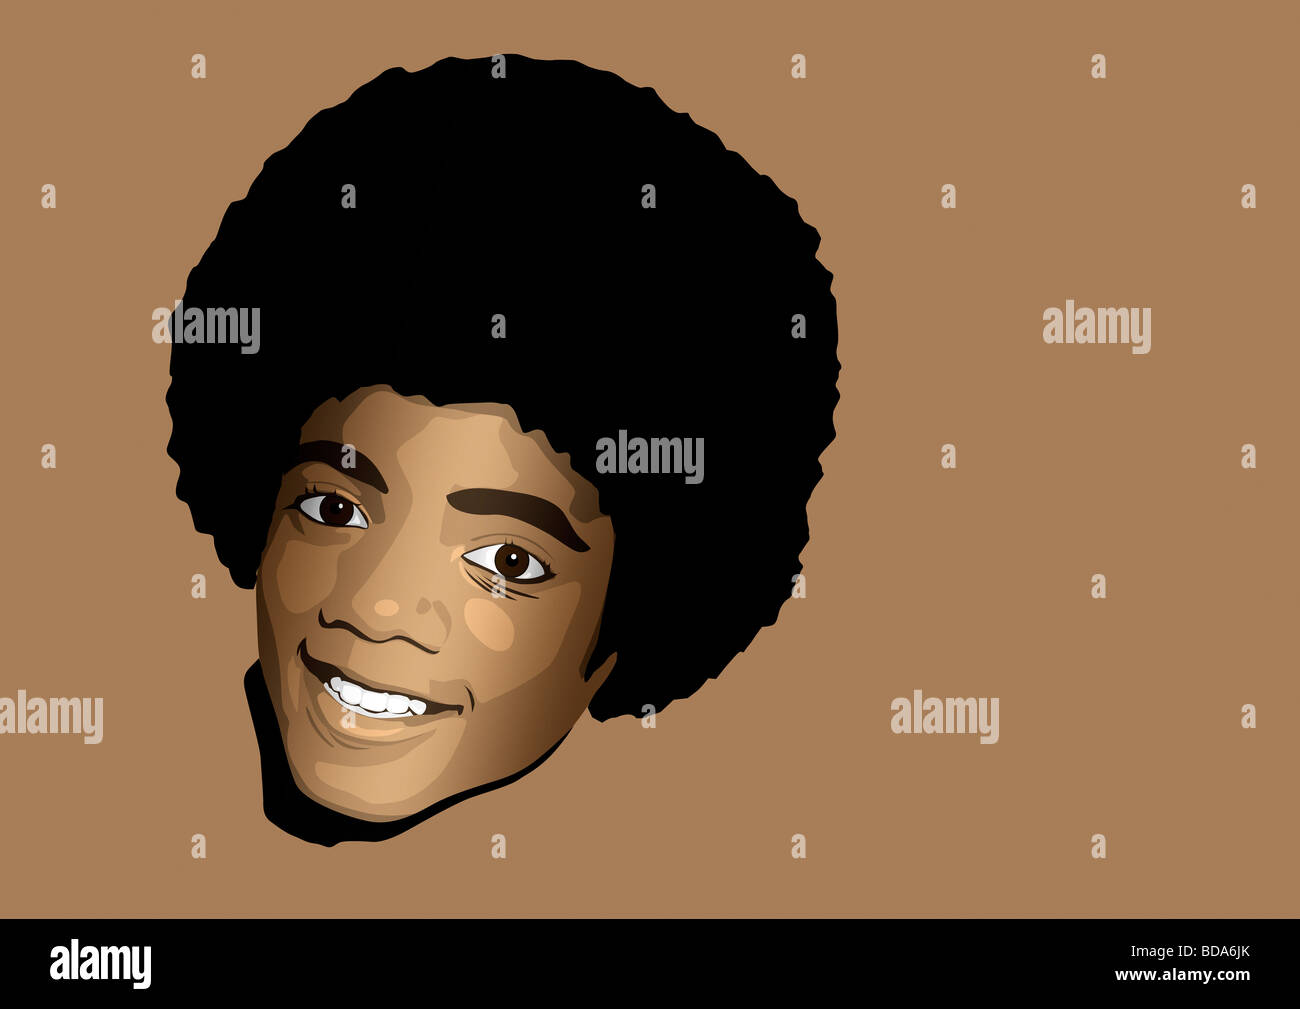 Illustration of The King of Pop, Michael Jackson as a young boy on a light brown background Stock Photo